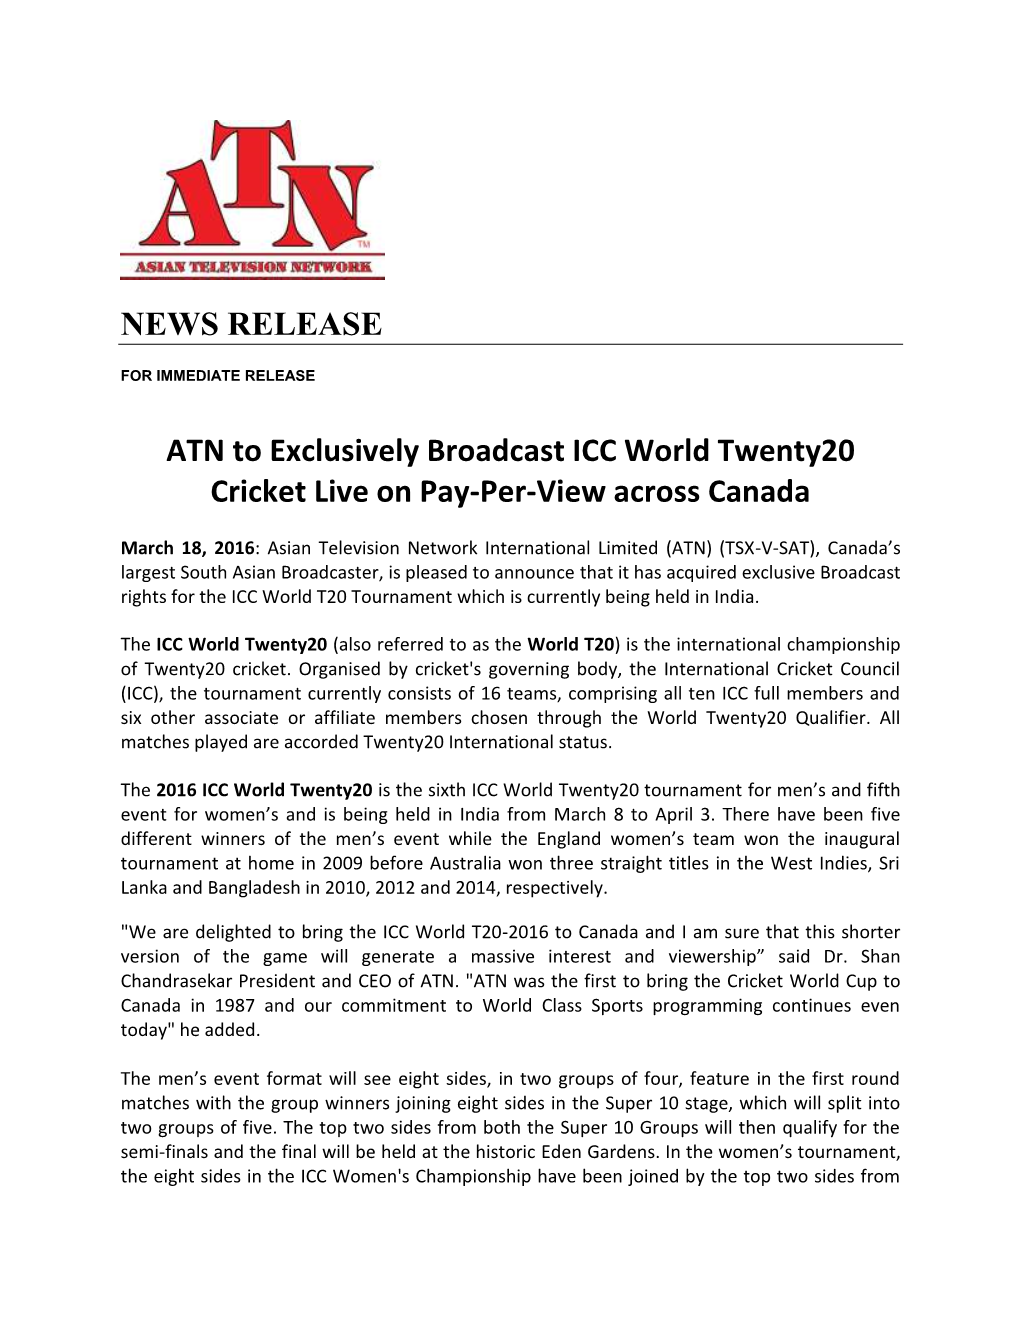 NEWS RELEASE ATN to Exclusively Broadcast ICC World